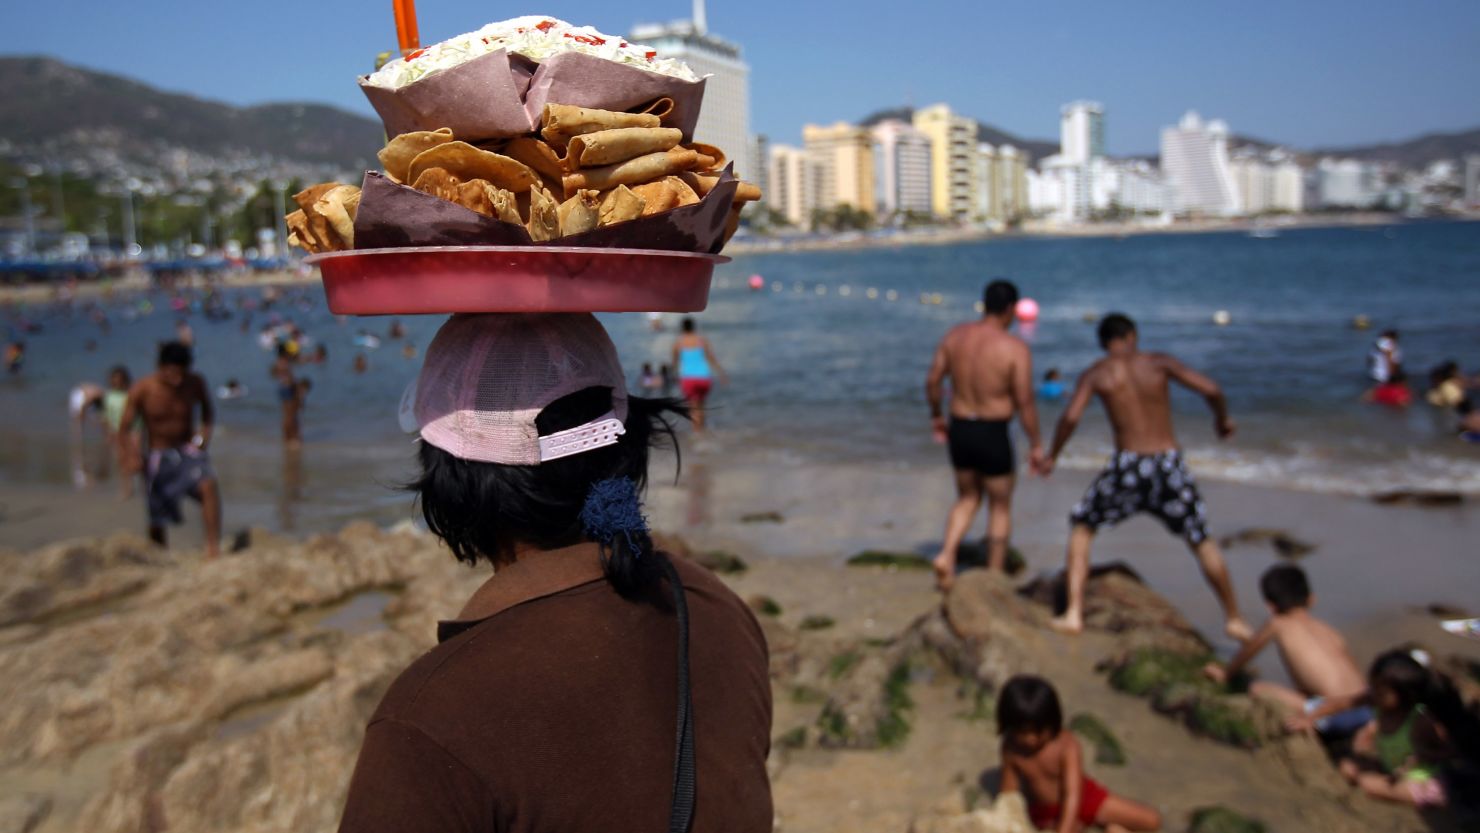 Some experts say fried versions of traditional foods are to blame for Mexico's widening waistlines.